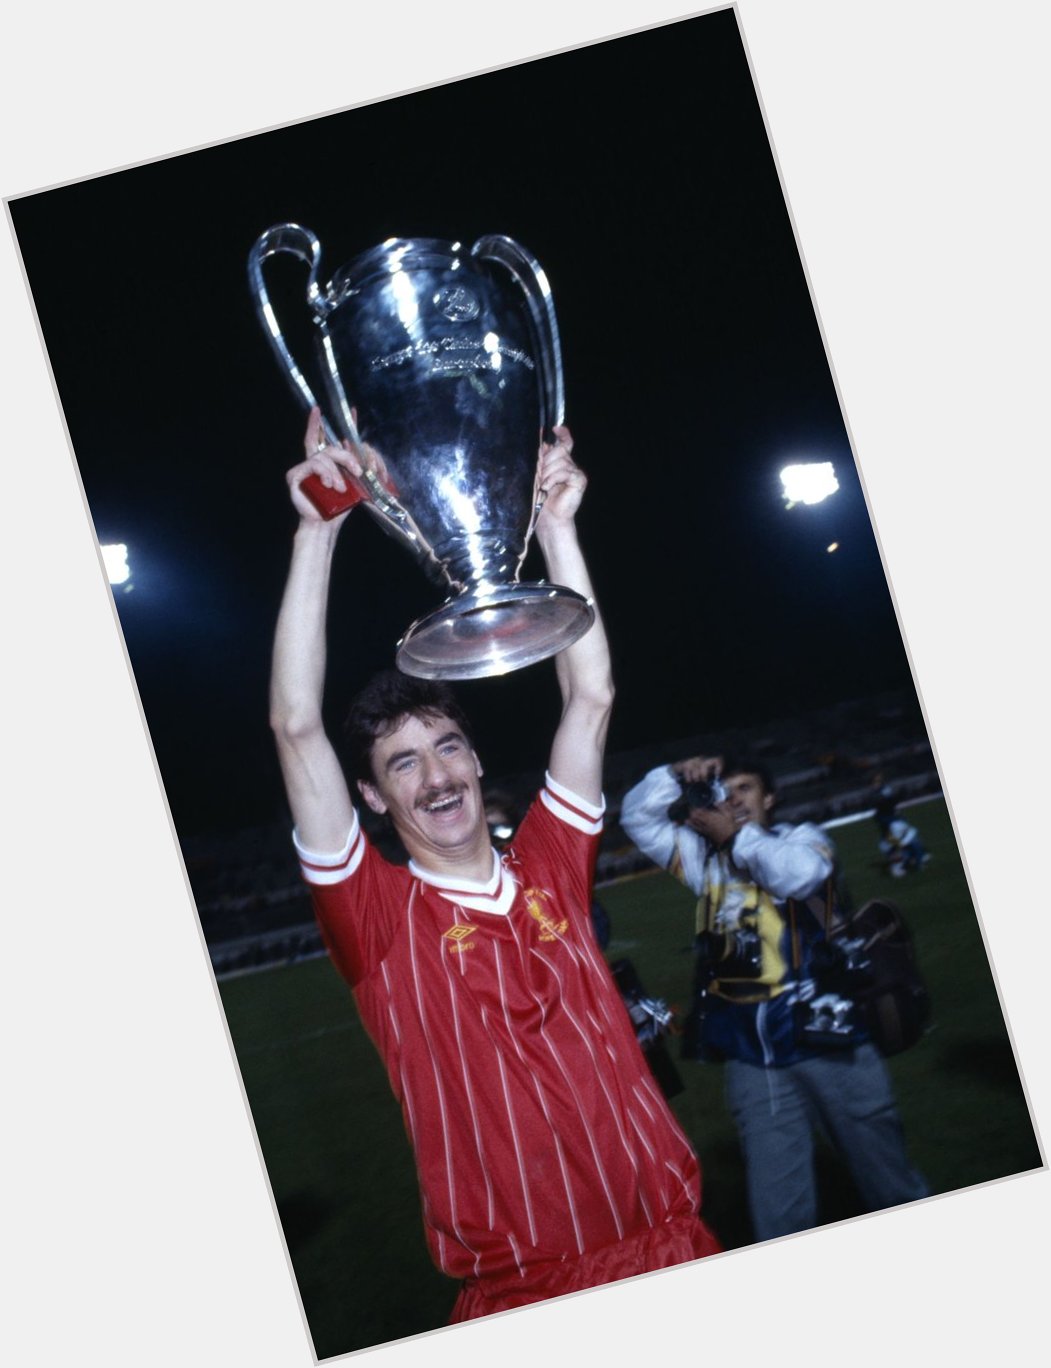 Happy 56th birthday, Ian Rush! 

Our greatest goalscorer won 14 trophies with scoring 346 goals in 660 games. 